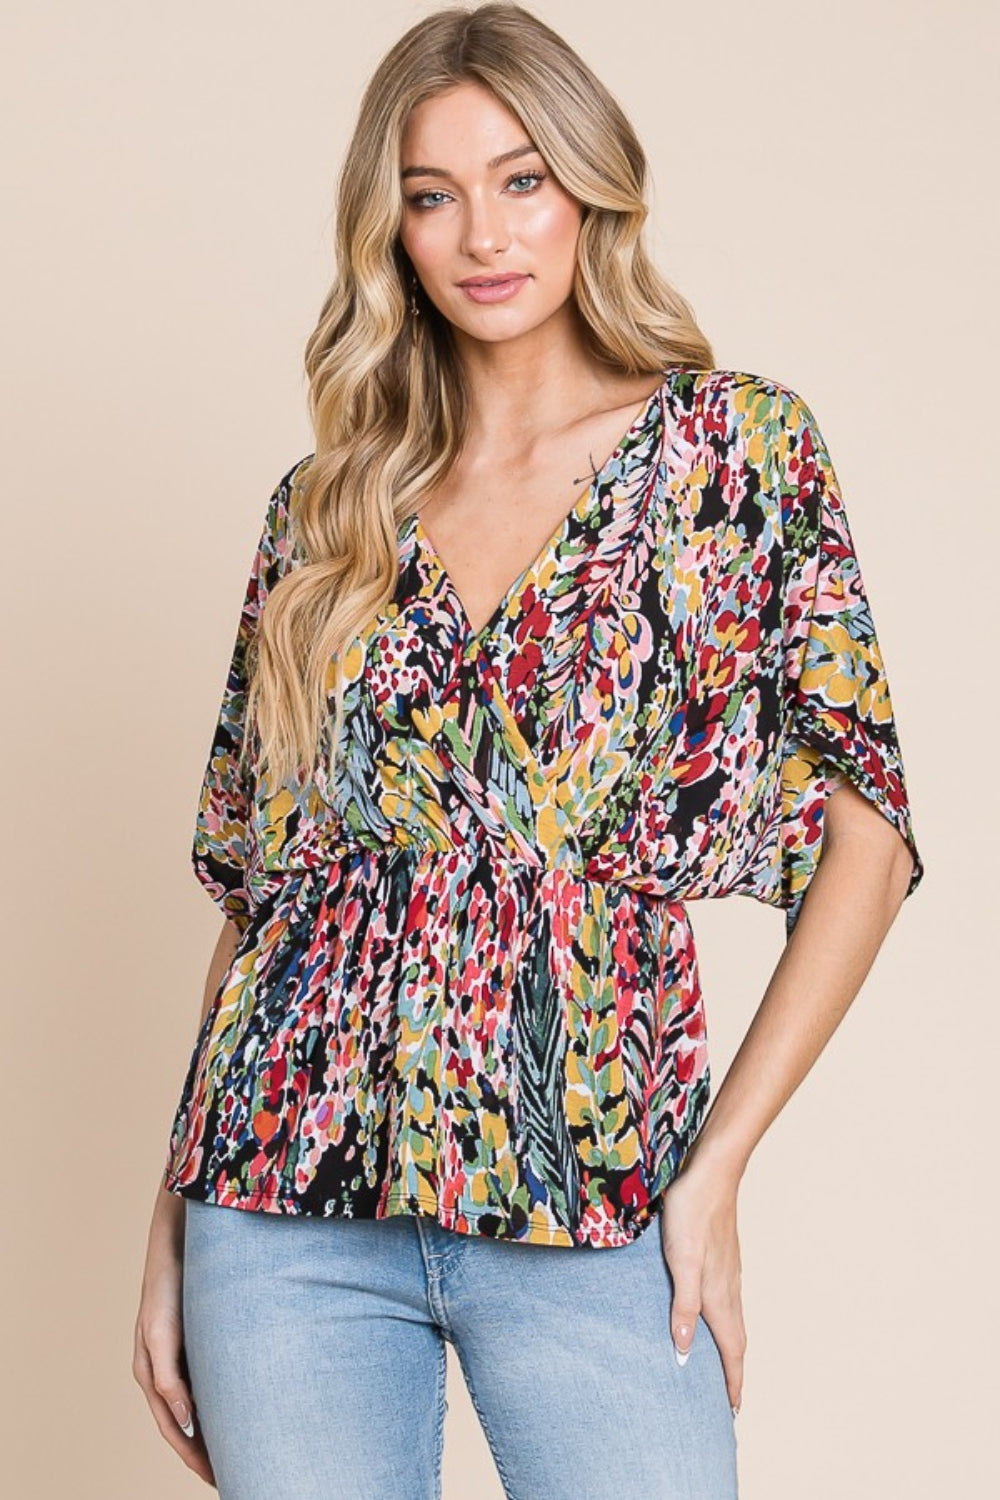 BOMBOM Printed Surplice Peplum Blouse-Short Sleeve Tops-Inspired by Justeen-Women's Clothing Boutique in Chicago, Illinois